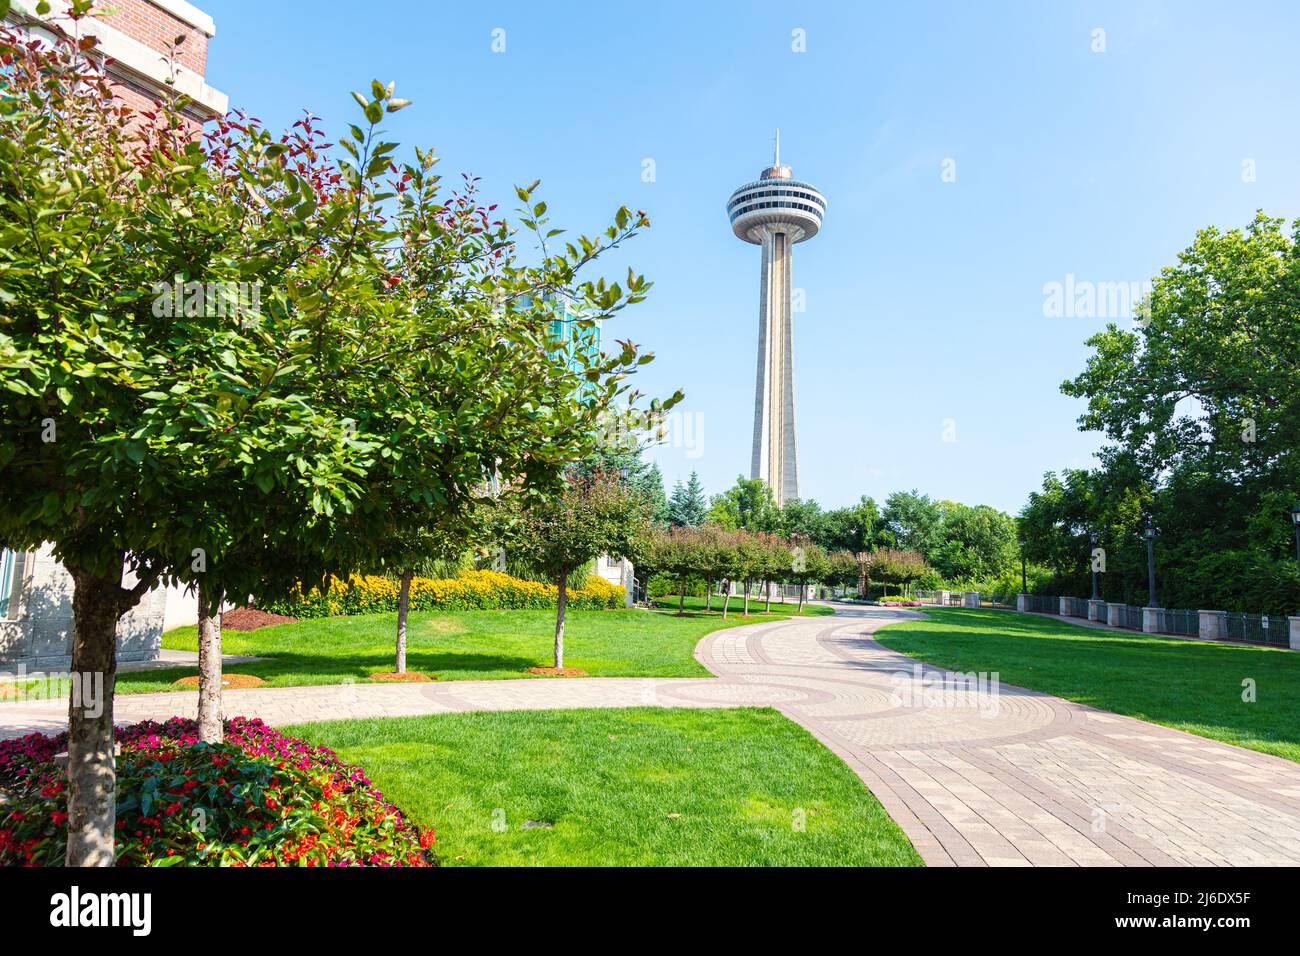 Niagara Falls, Canada - August 27, 2021: The most famous Niagara Falls restaurant – The Skylon Tower with unique vantage point of the Horseshoe Falls. Stock Photo